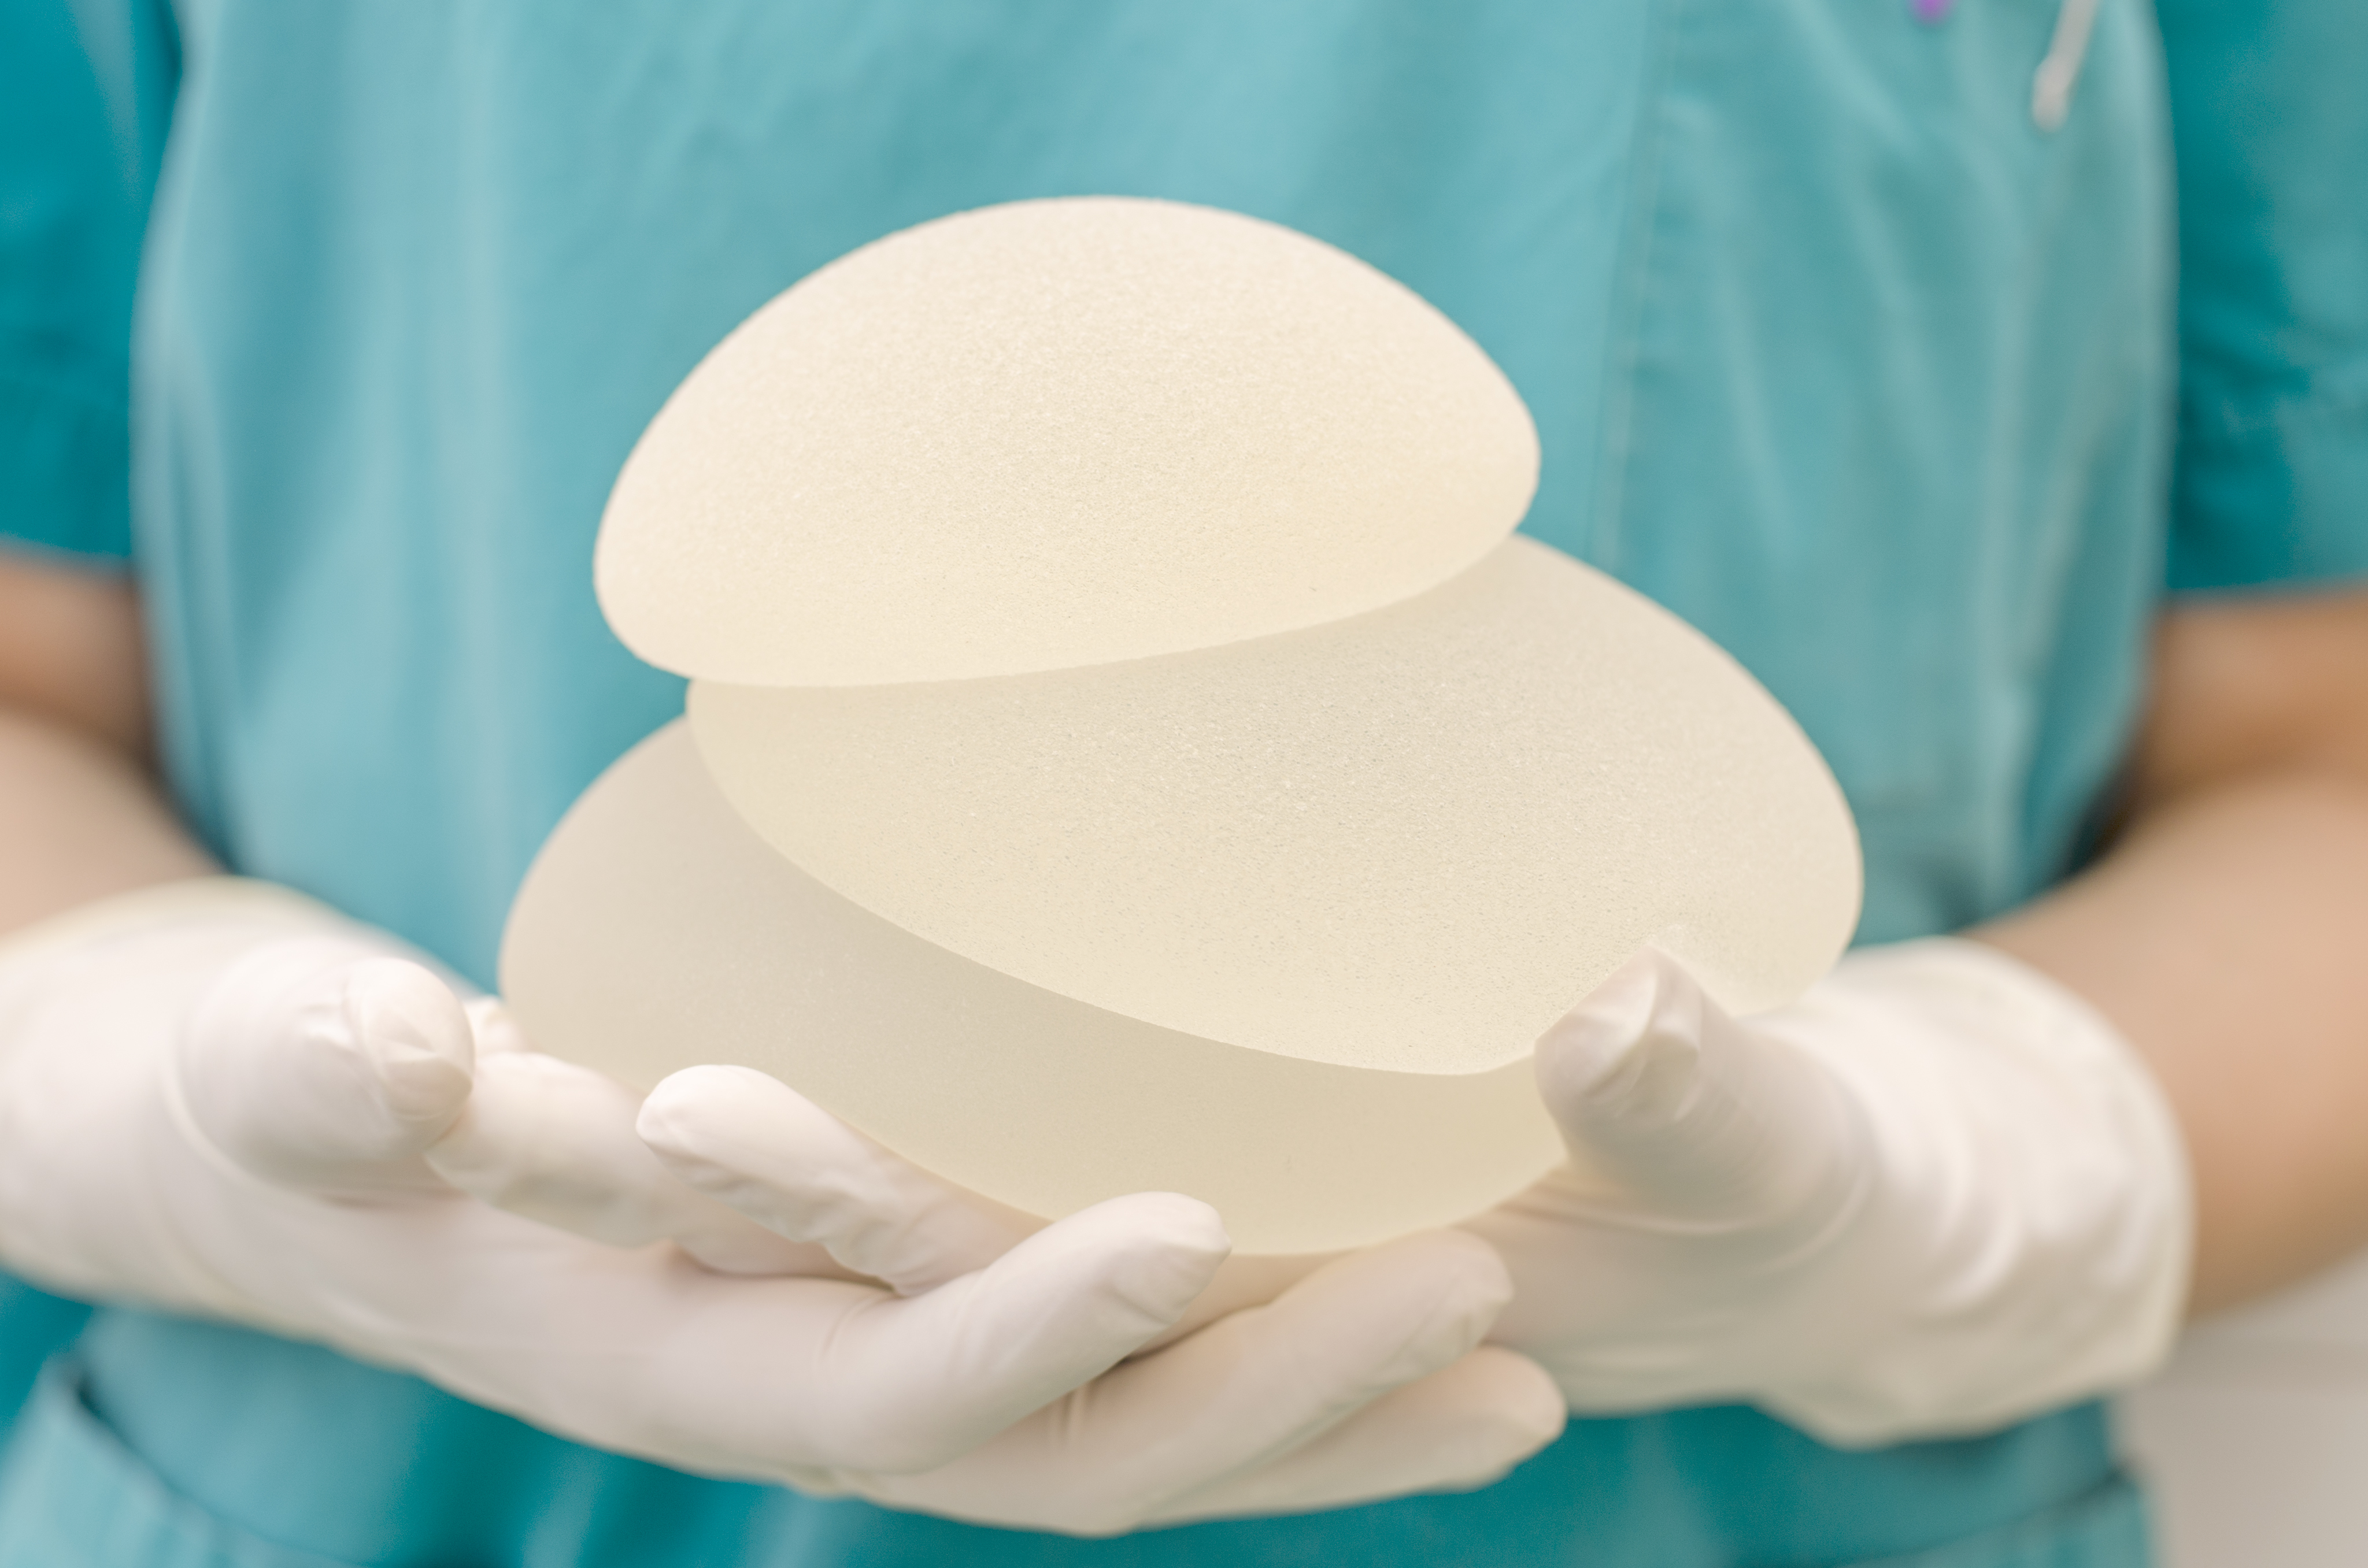 Medical Device Alert - Silicone gel filled breast implants manufactured by Poly Implant Prosthese